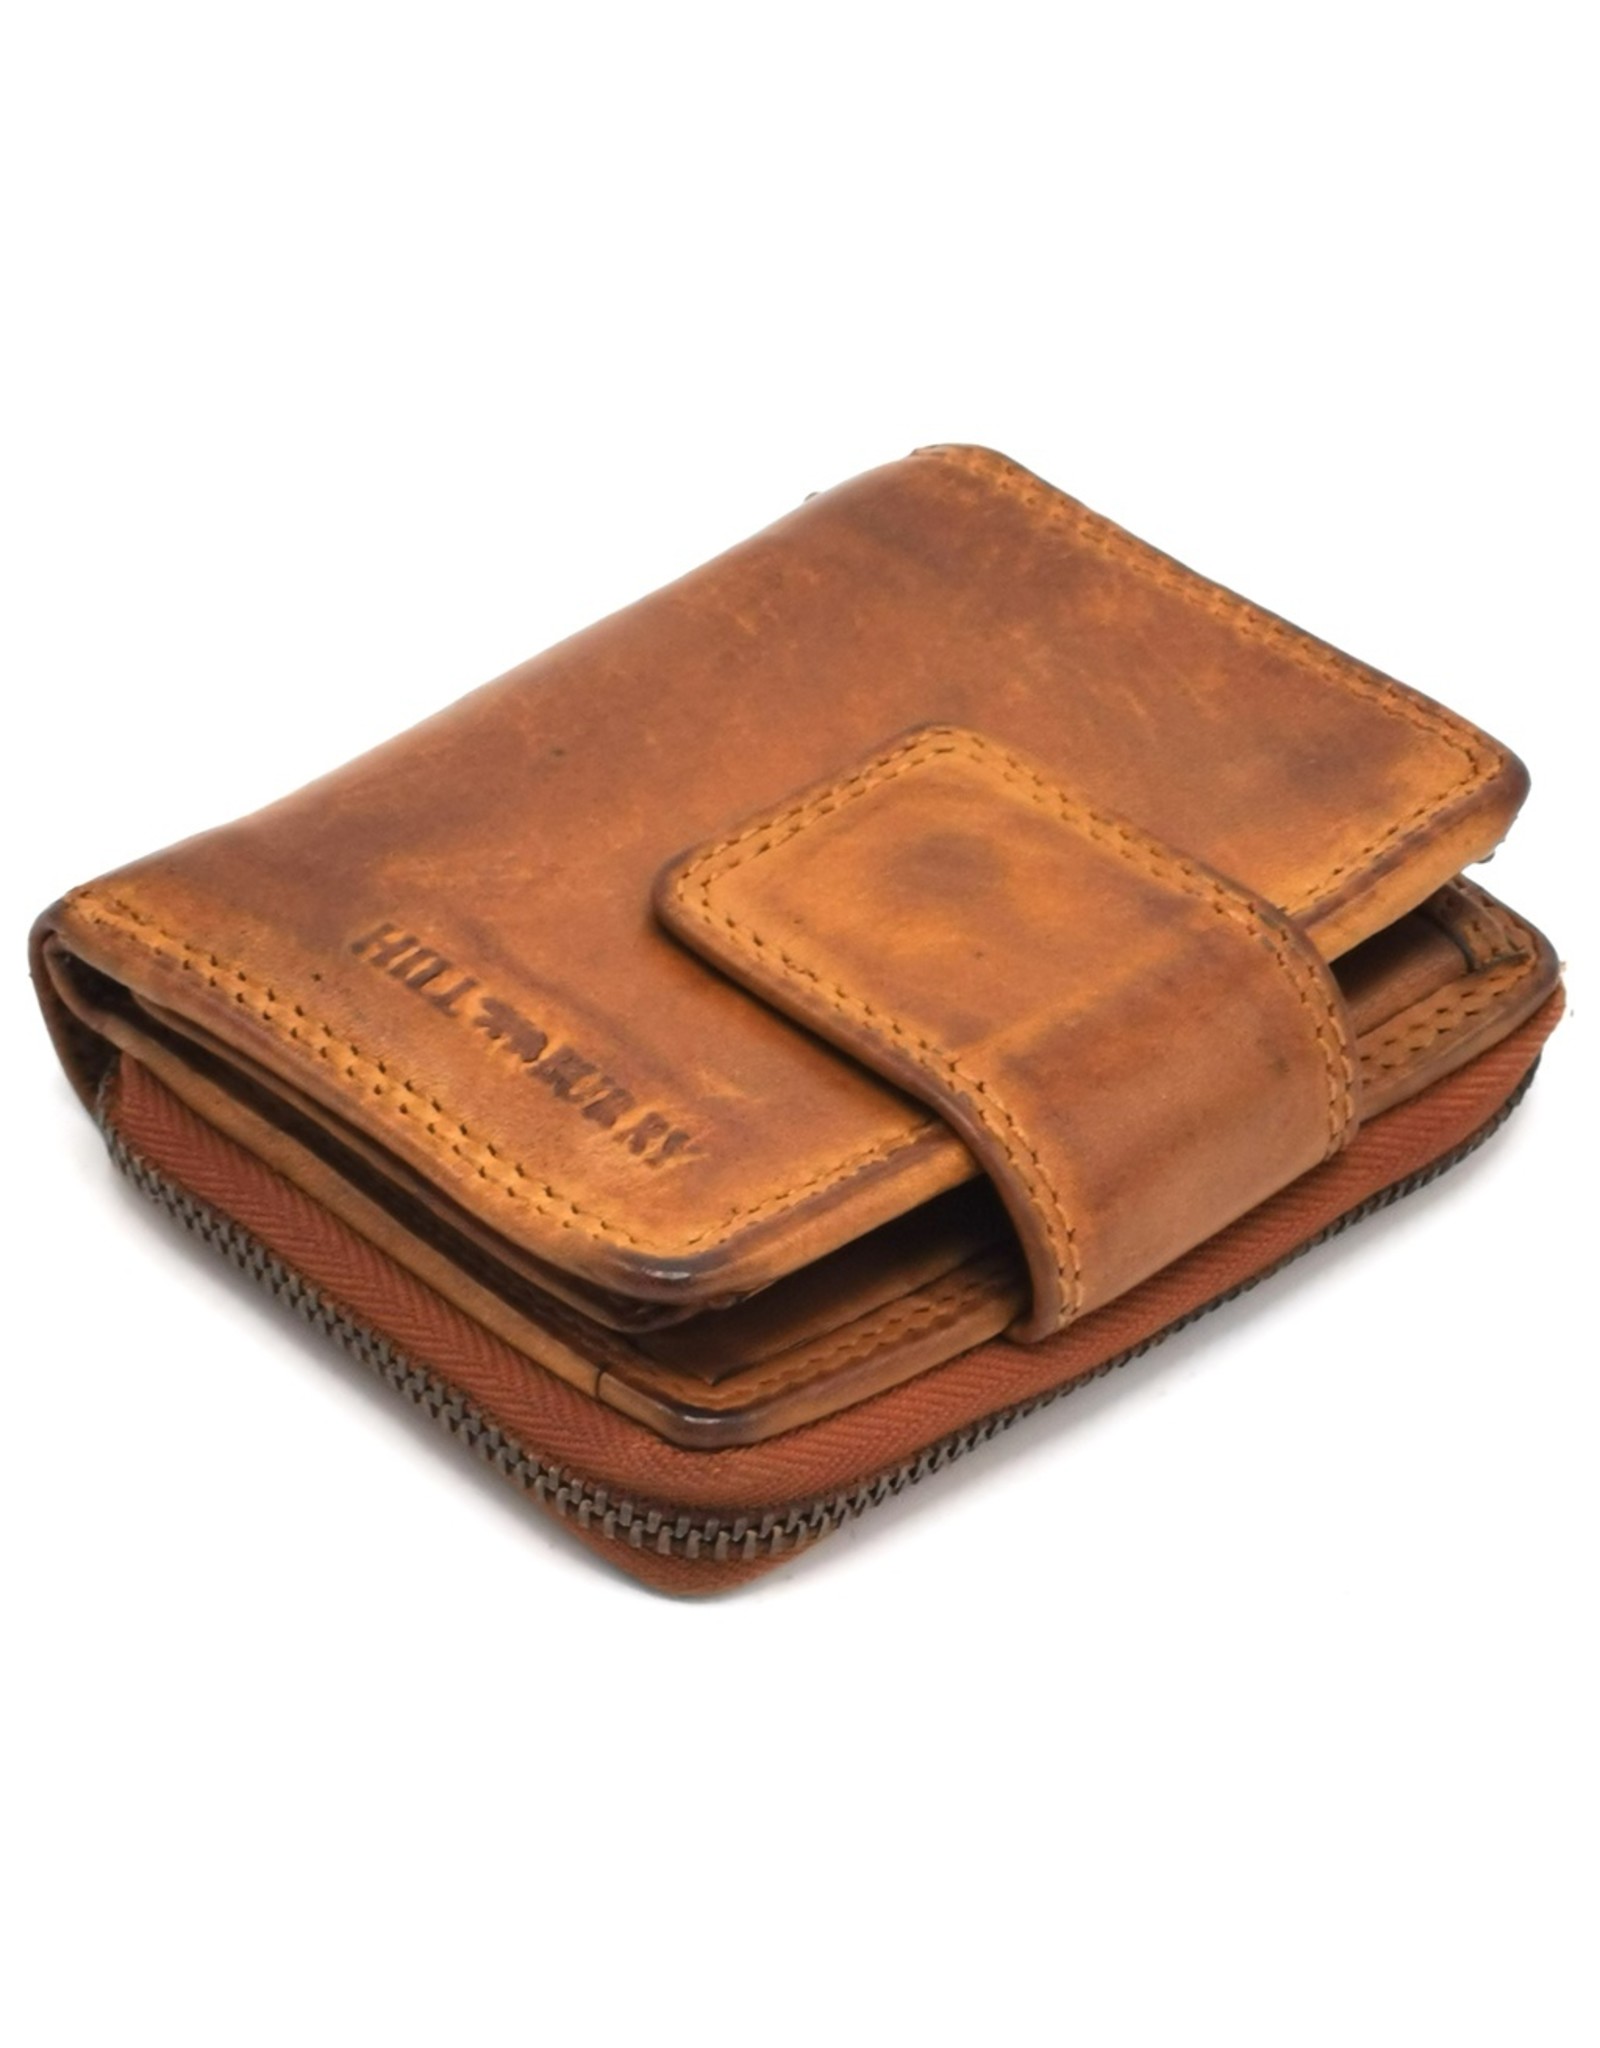 HillBurry Leather Wallets - HillBurry Wallet Washed Leather Cognac